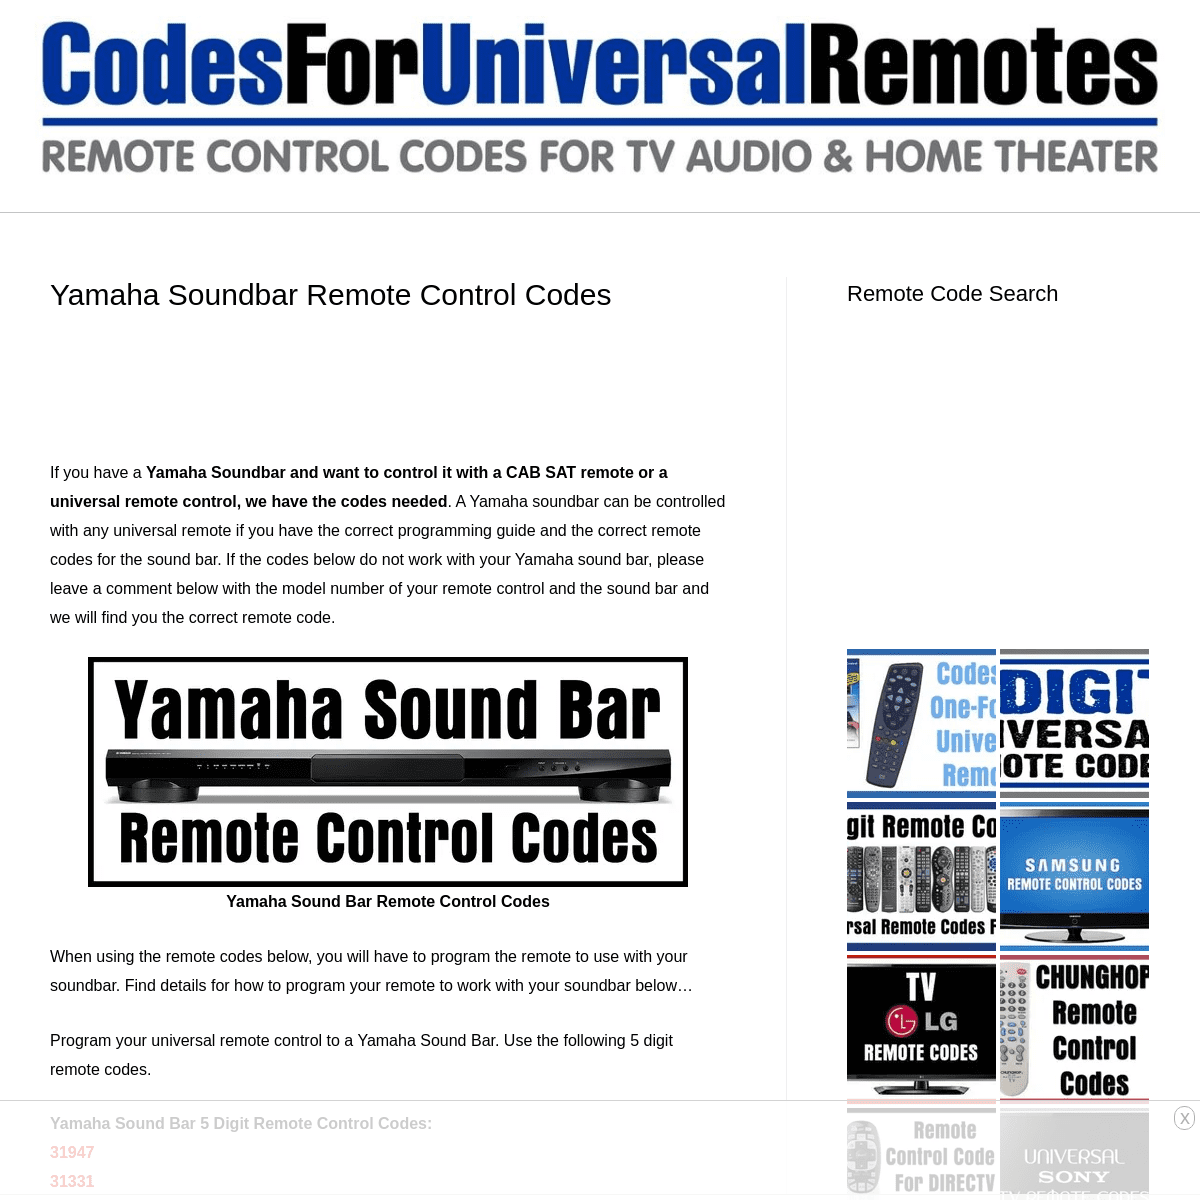 A complete backup of https://codesforuniversalremotes.com/remote-control-codes-for-yamaha-sound-bars/